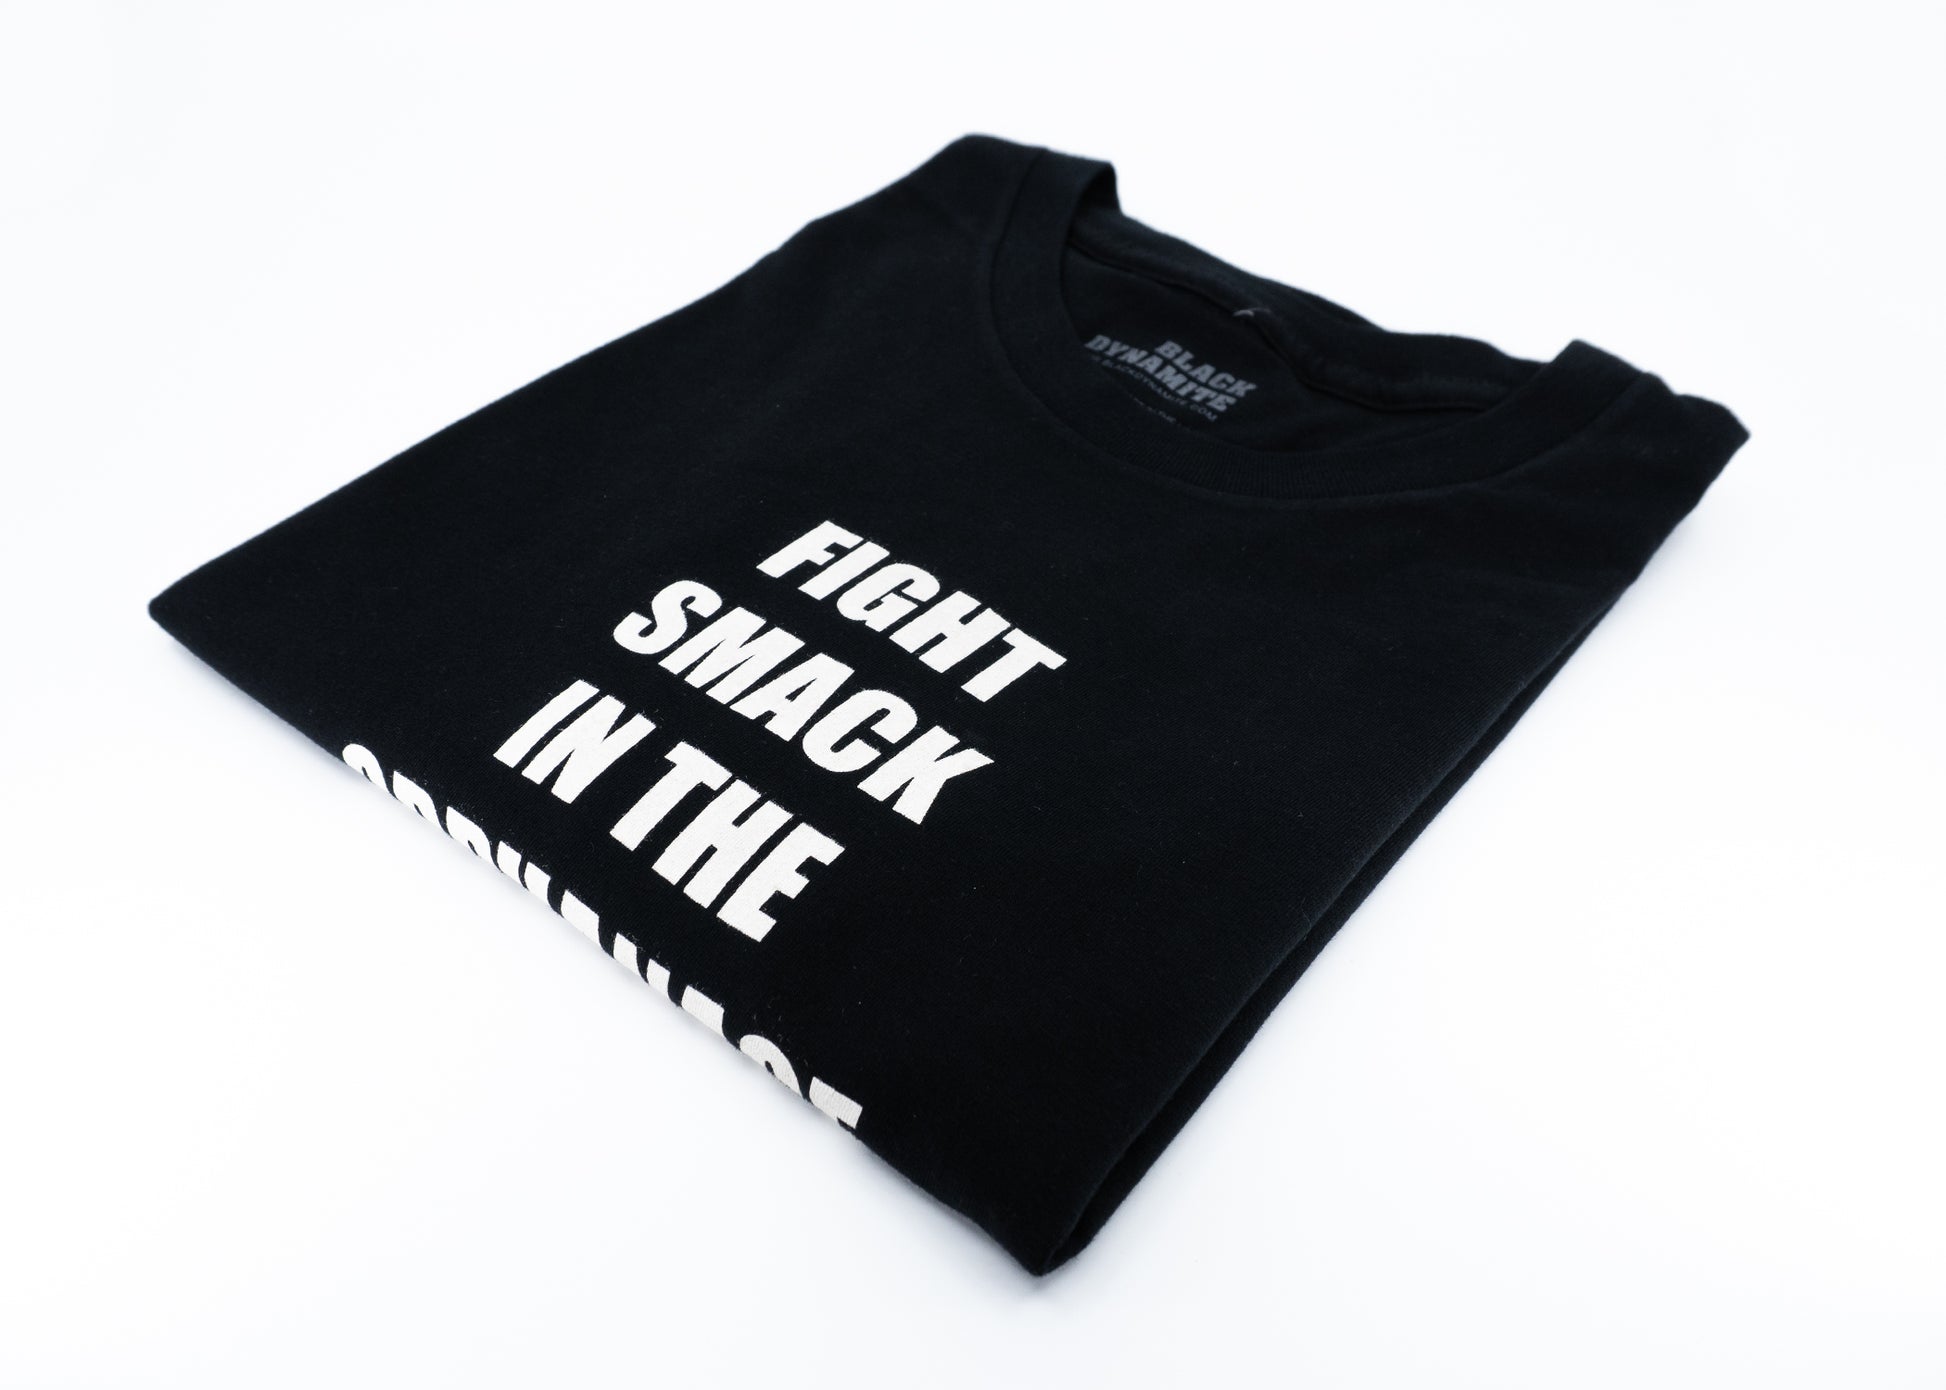 BLACK DYNAMITE! "Fight Smack in the Orphanage" Small Text Tee by Titmouse Detail View